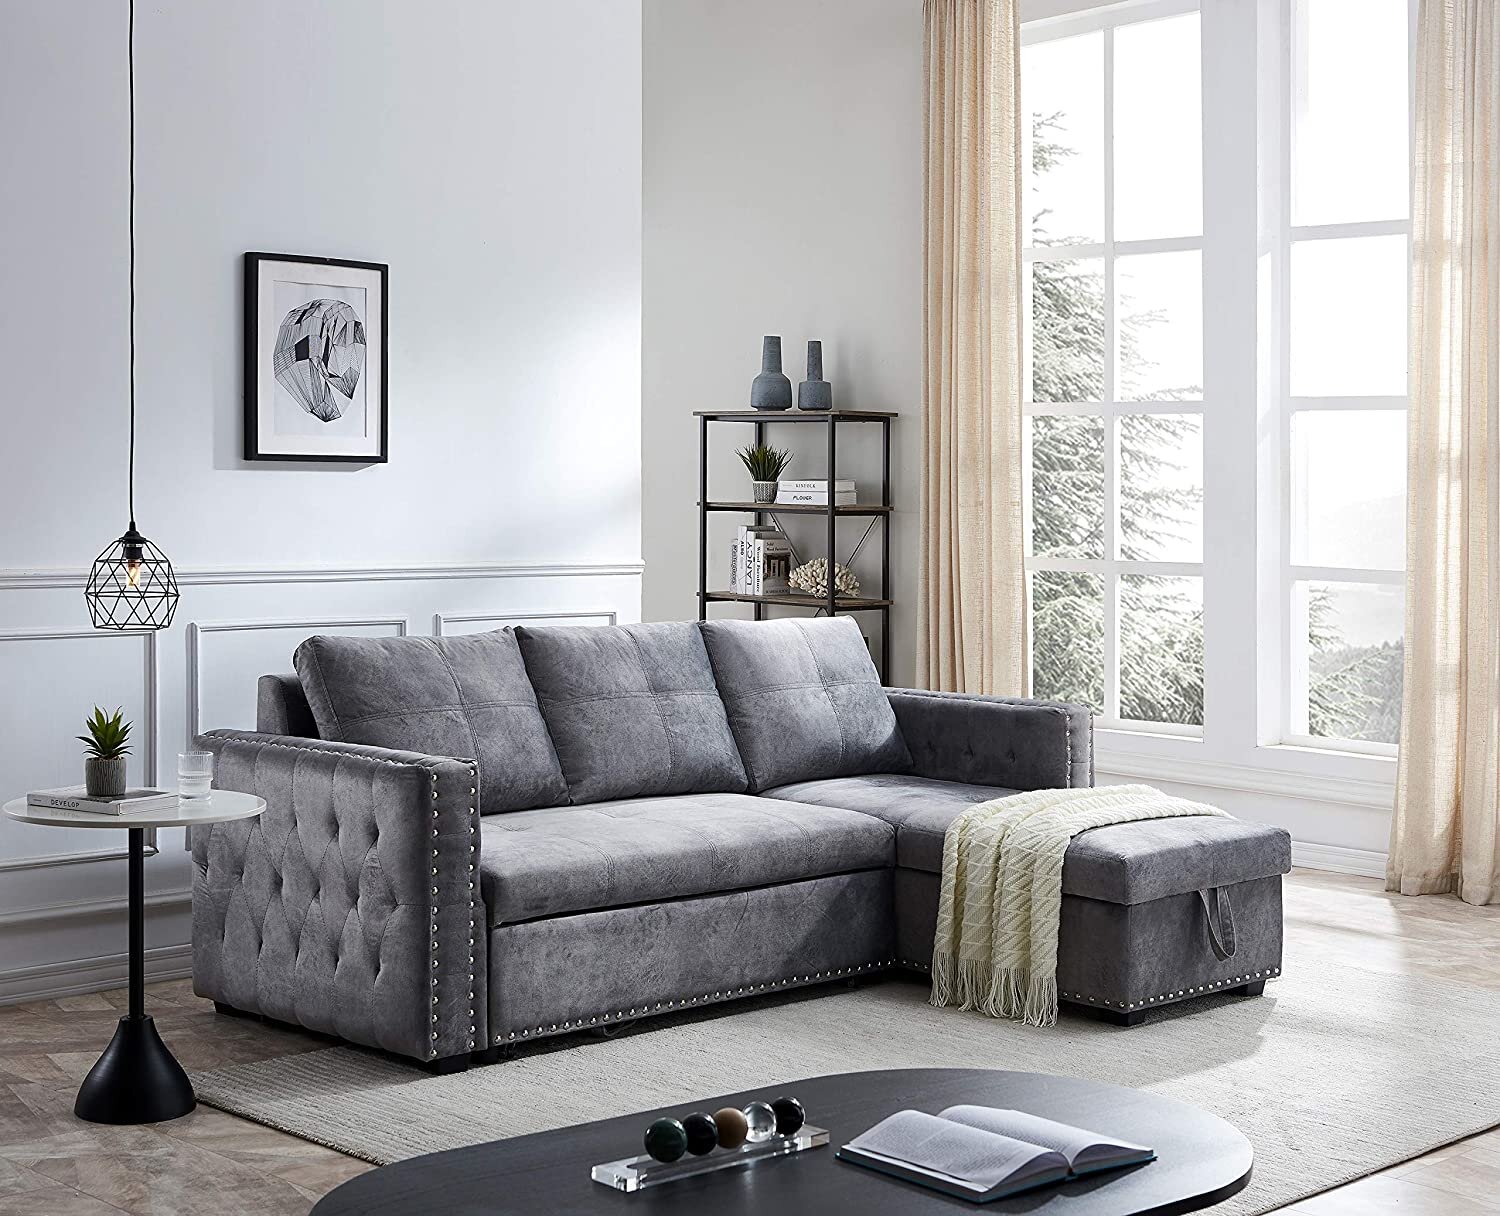 91.5 inch MAFOROB Reversible Sleeper Sectional Sofa with Pull Out Bed L-Shape 3 Seat Couch with Storage Chaise Gray 